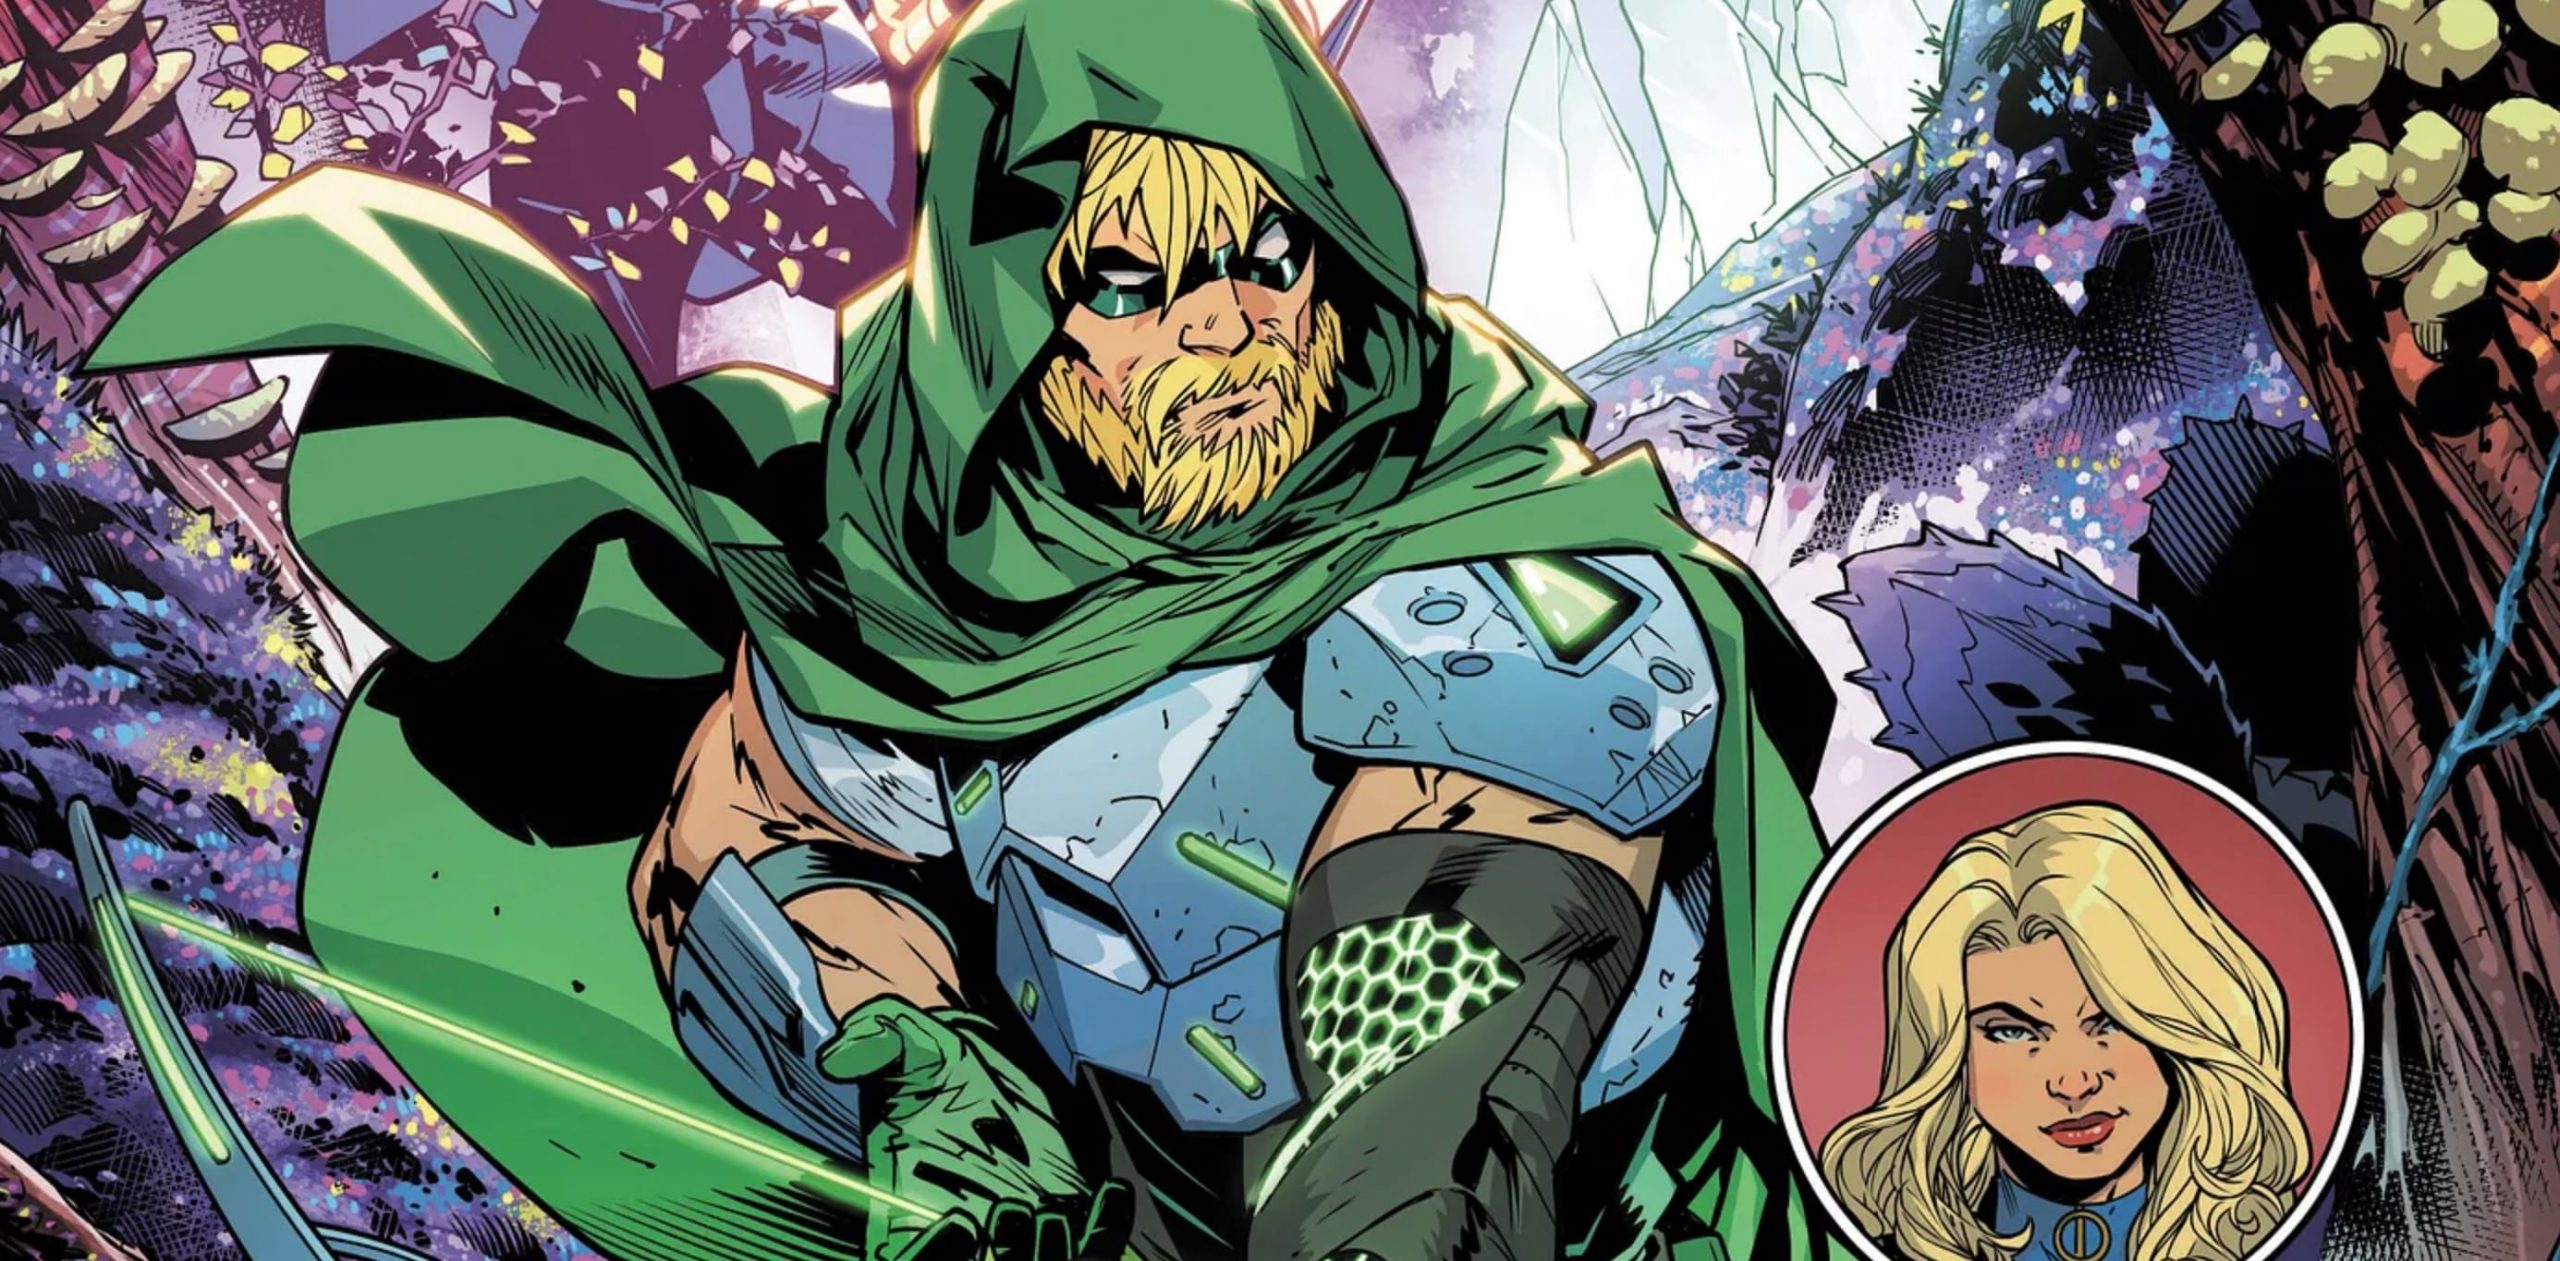 'Green Arrow' gets extended to 12-issue series, new character Troublemaker